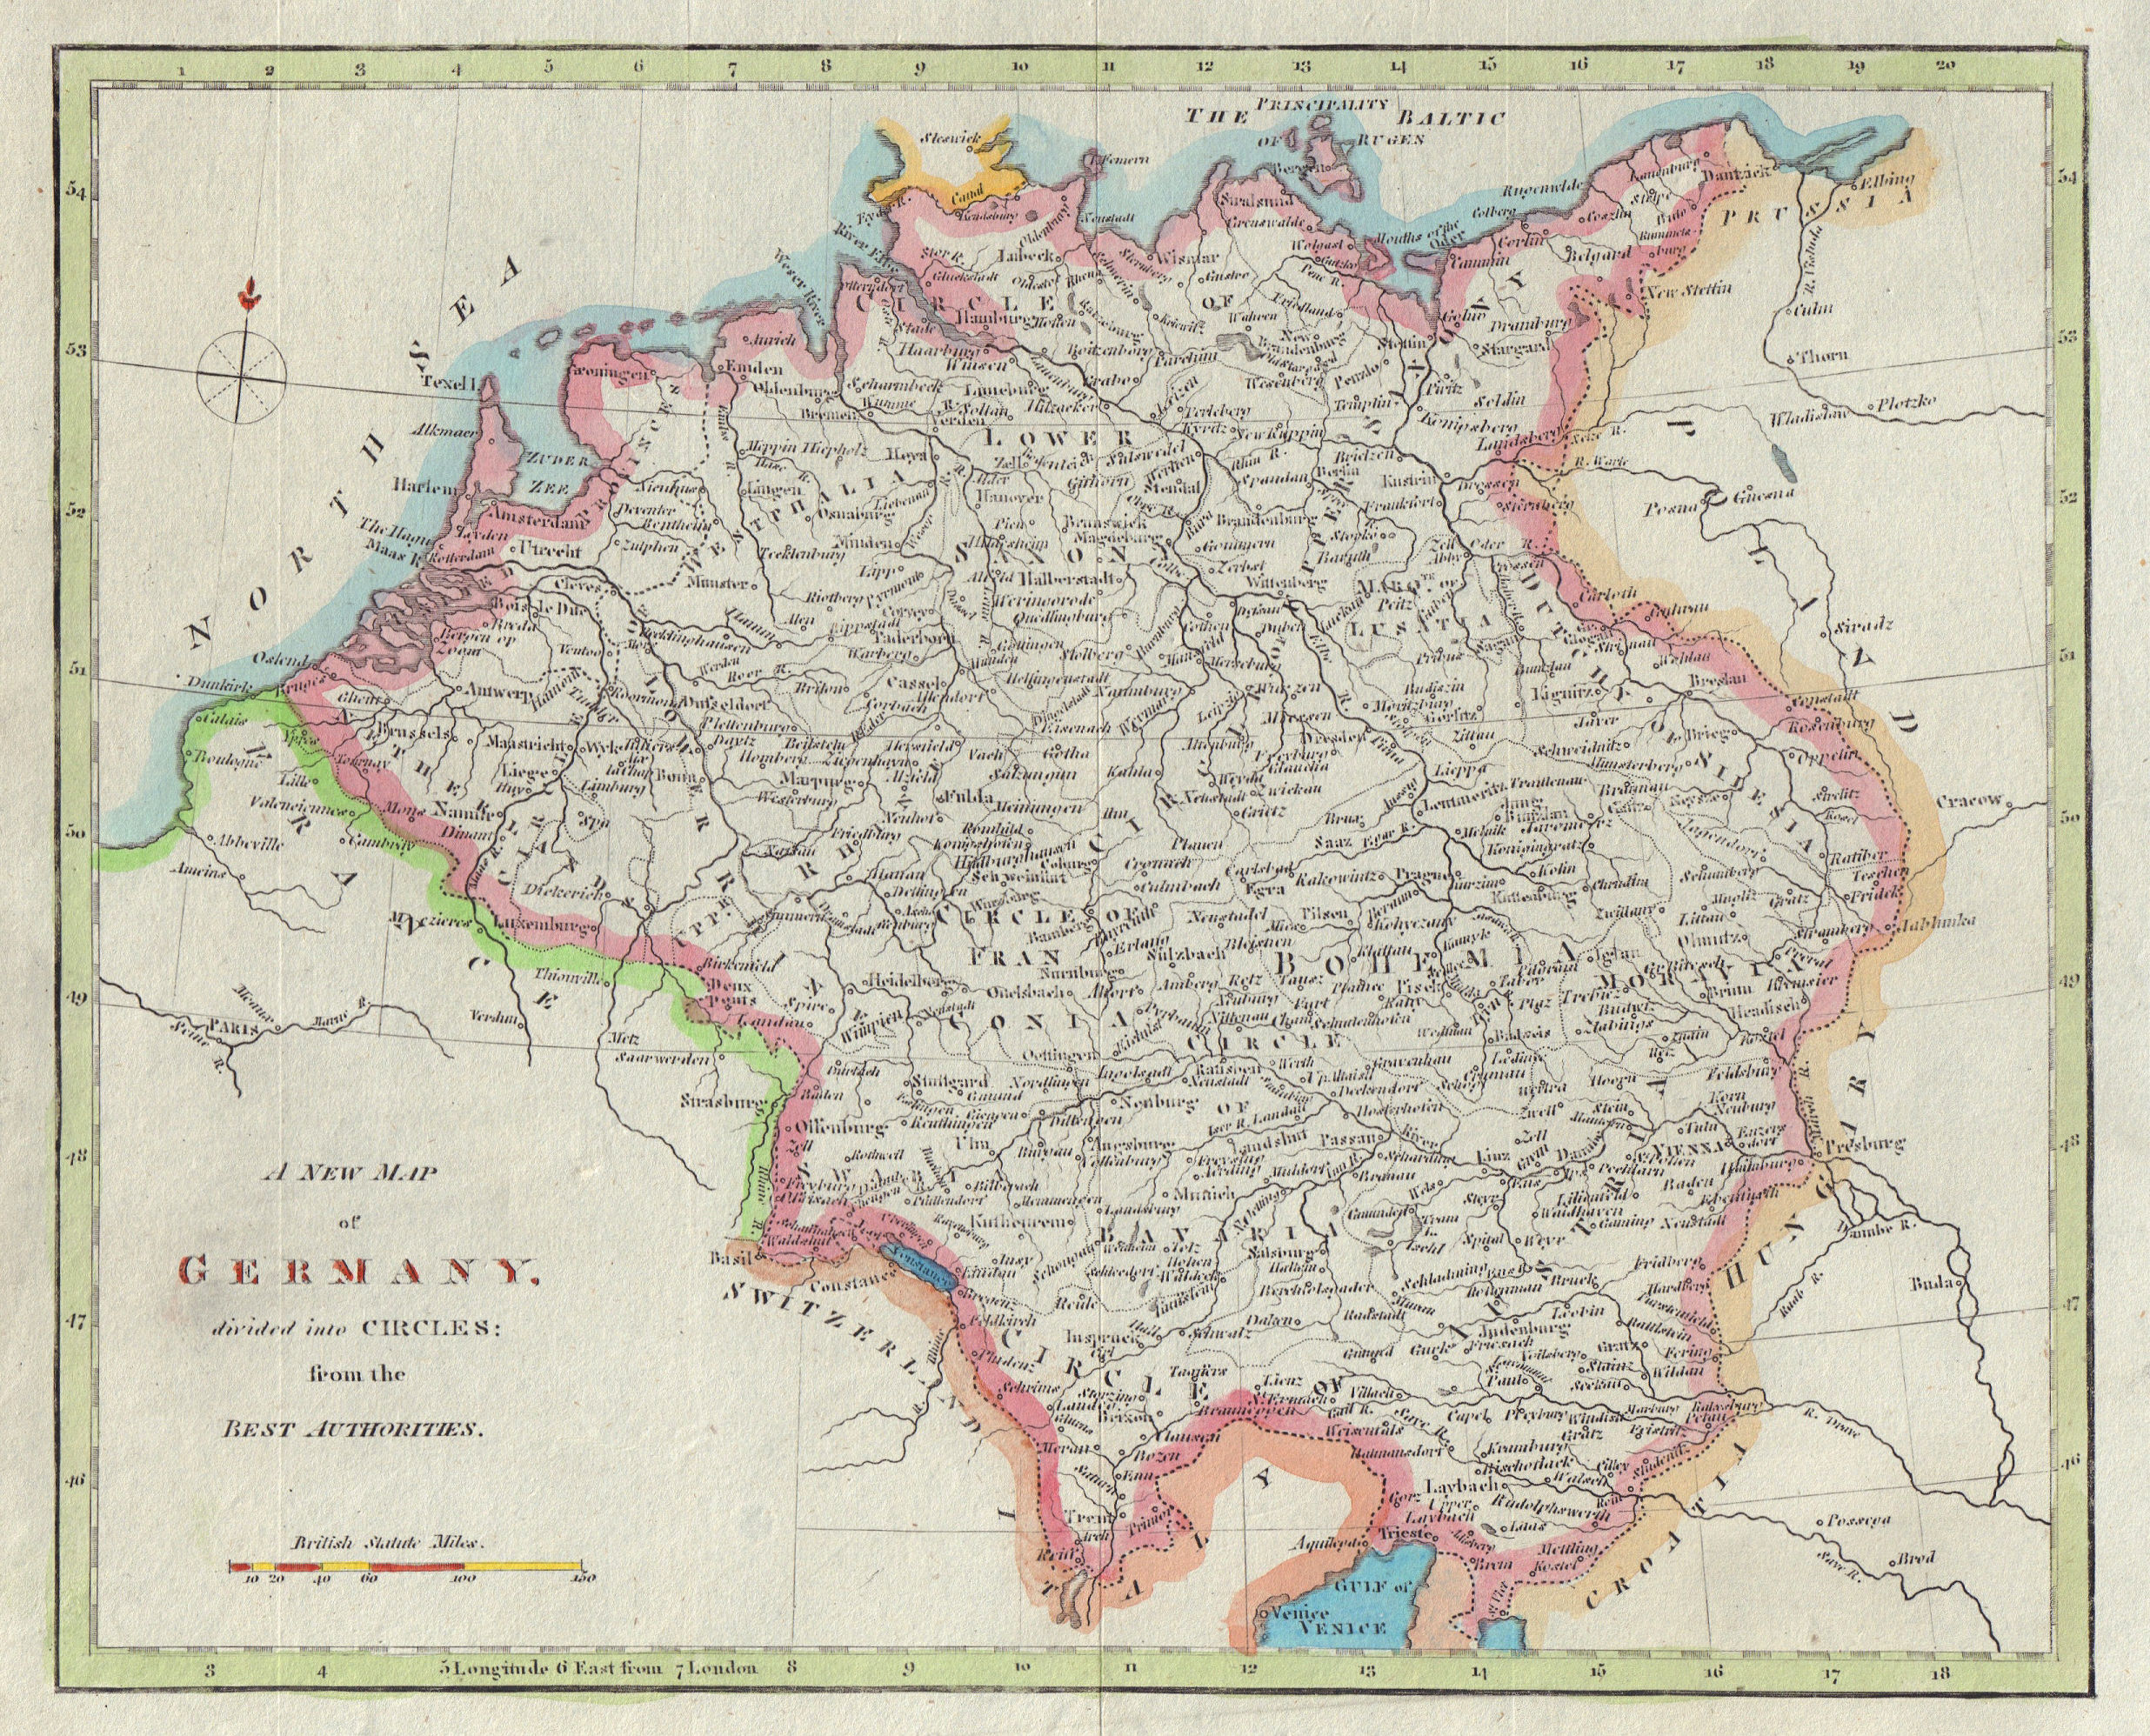 Associate Product A new map of Germany divided into Circles. Austria Switzerland NL Belgium 1811